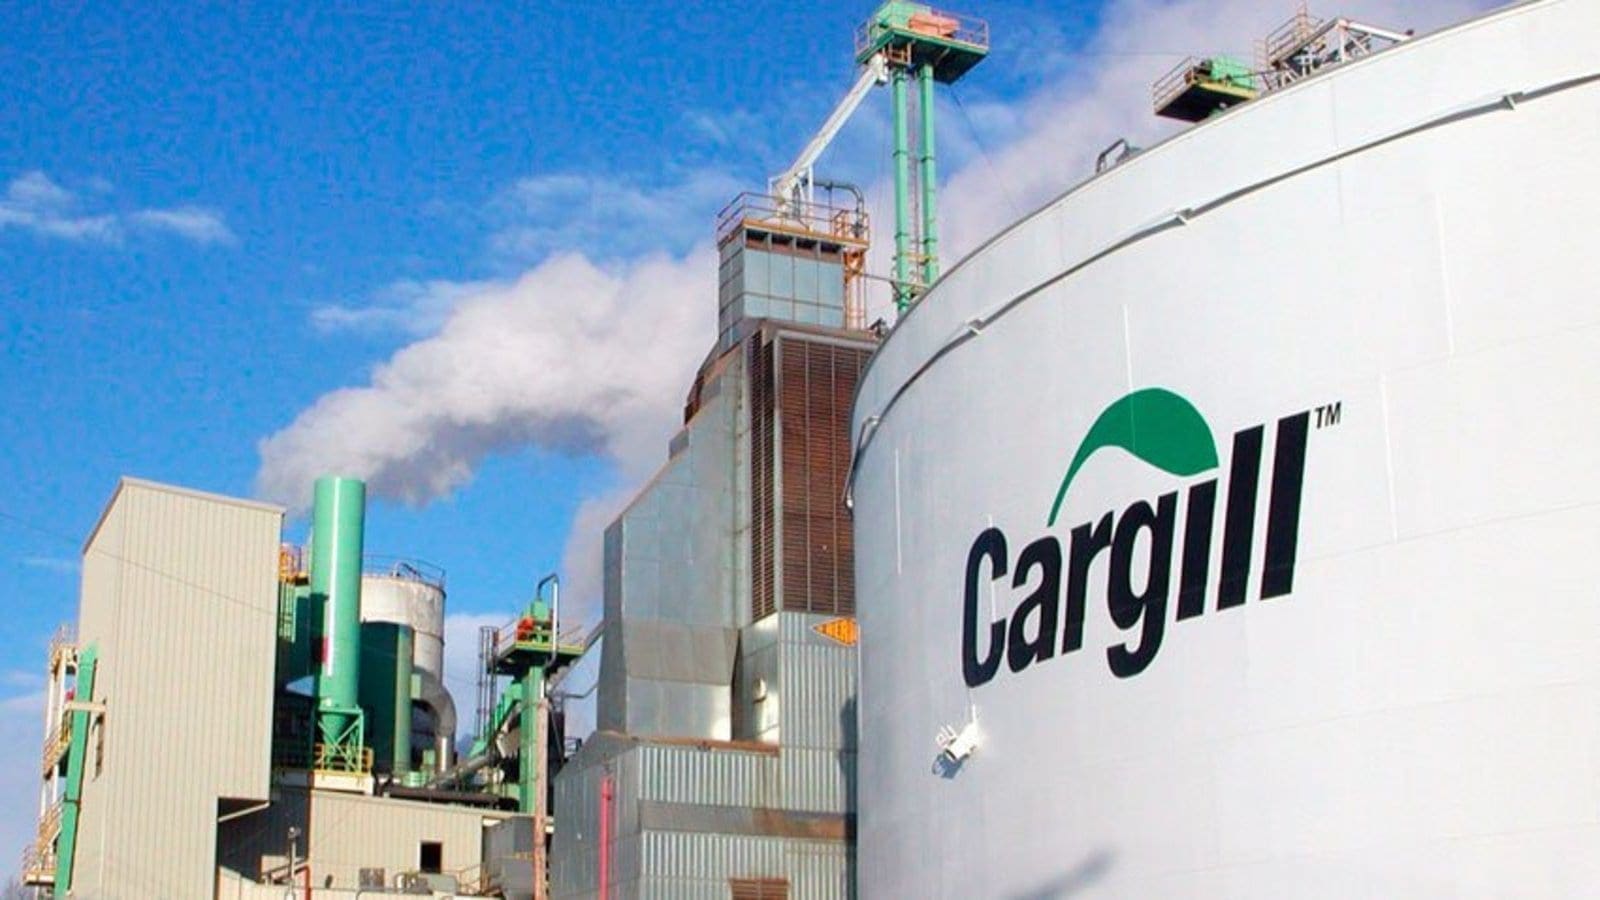 Cargill begins construction of new palm oil facility in Indonesia to meet rising demand